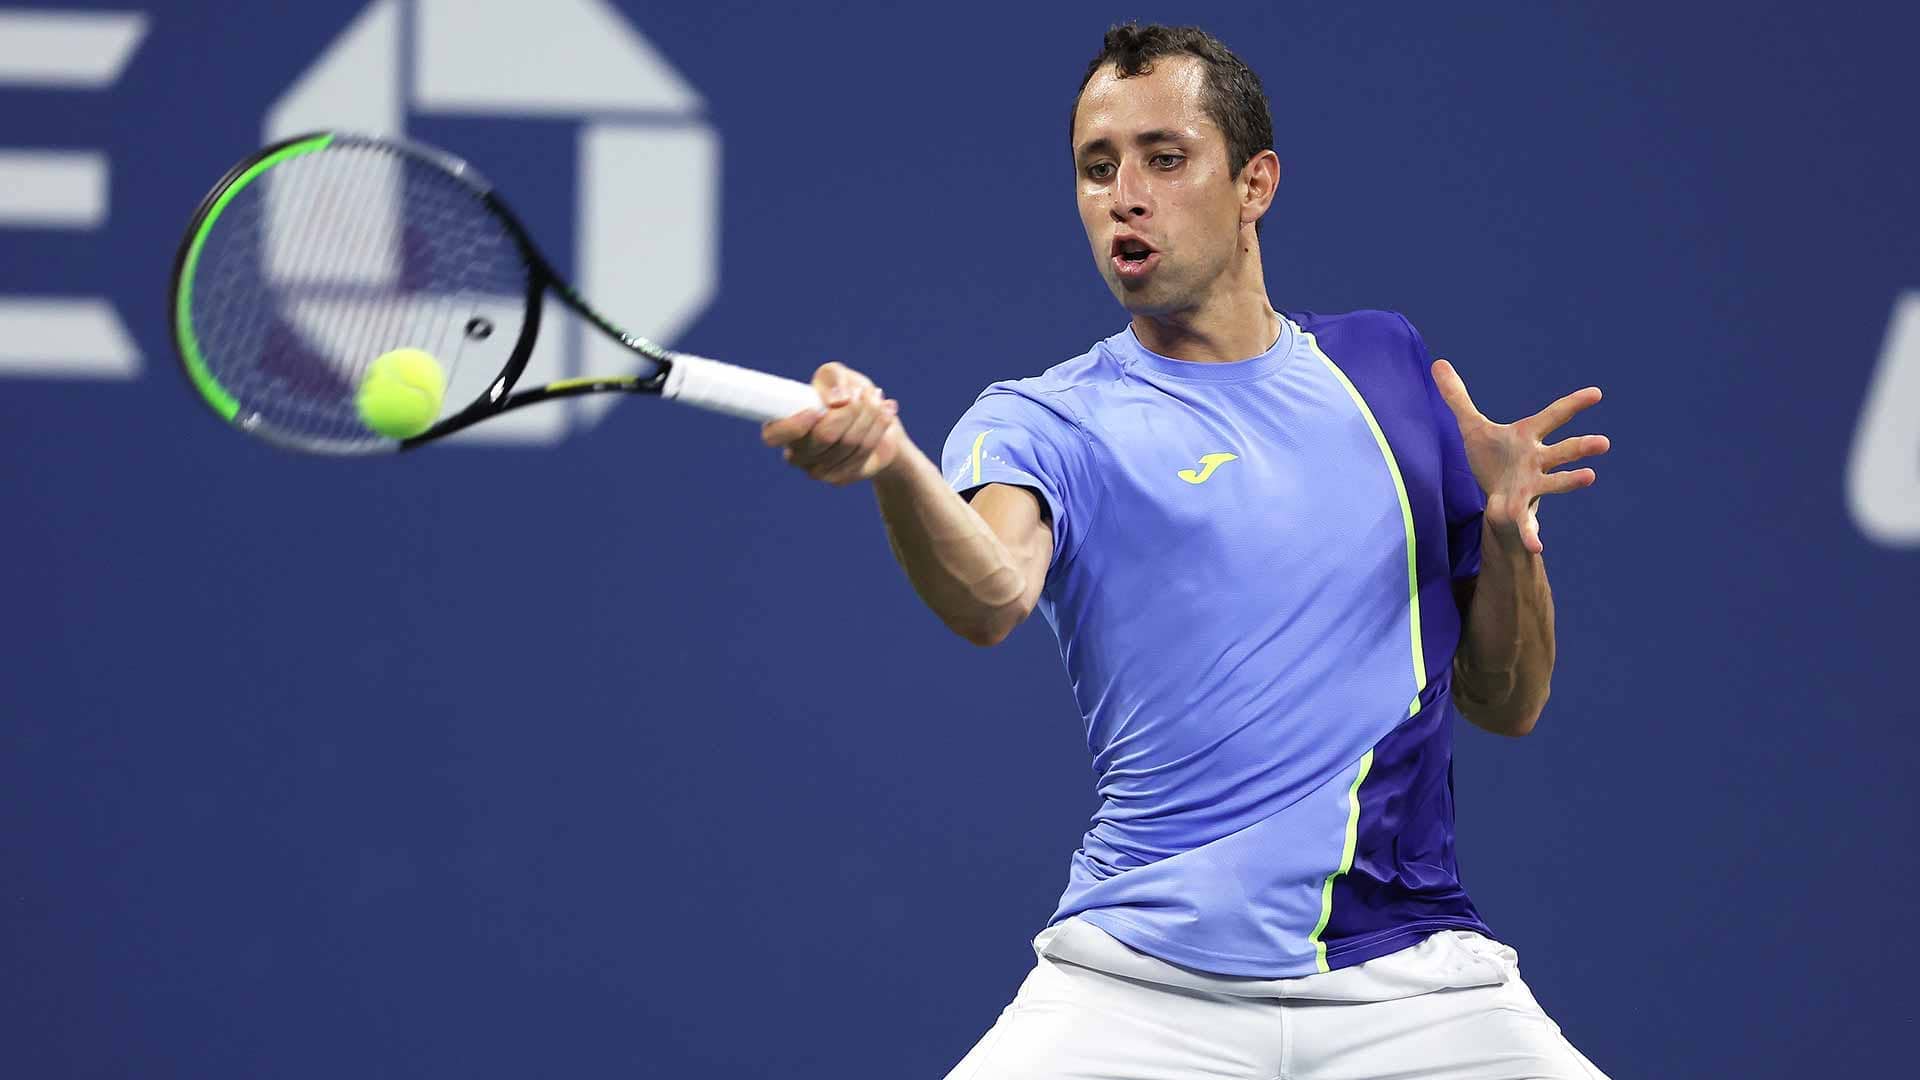 Daniel Elahi Galan advanced through qualifying and is into the second round of the US Open.